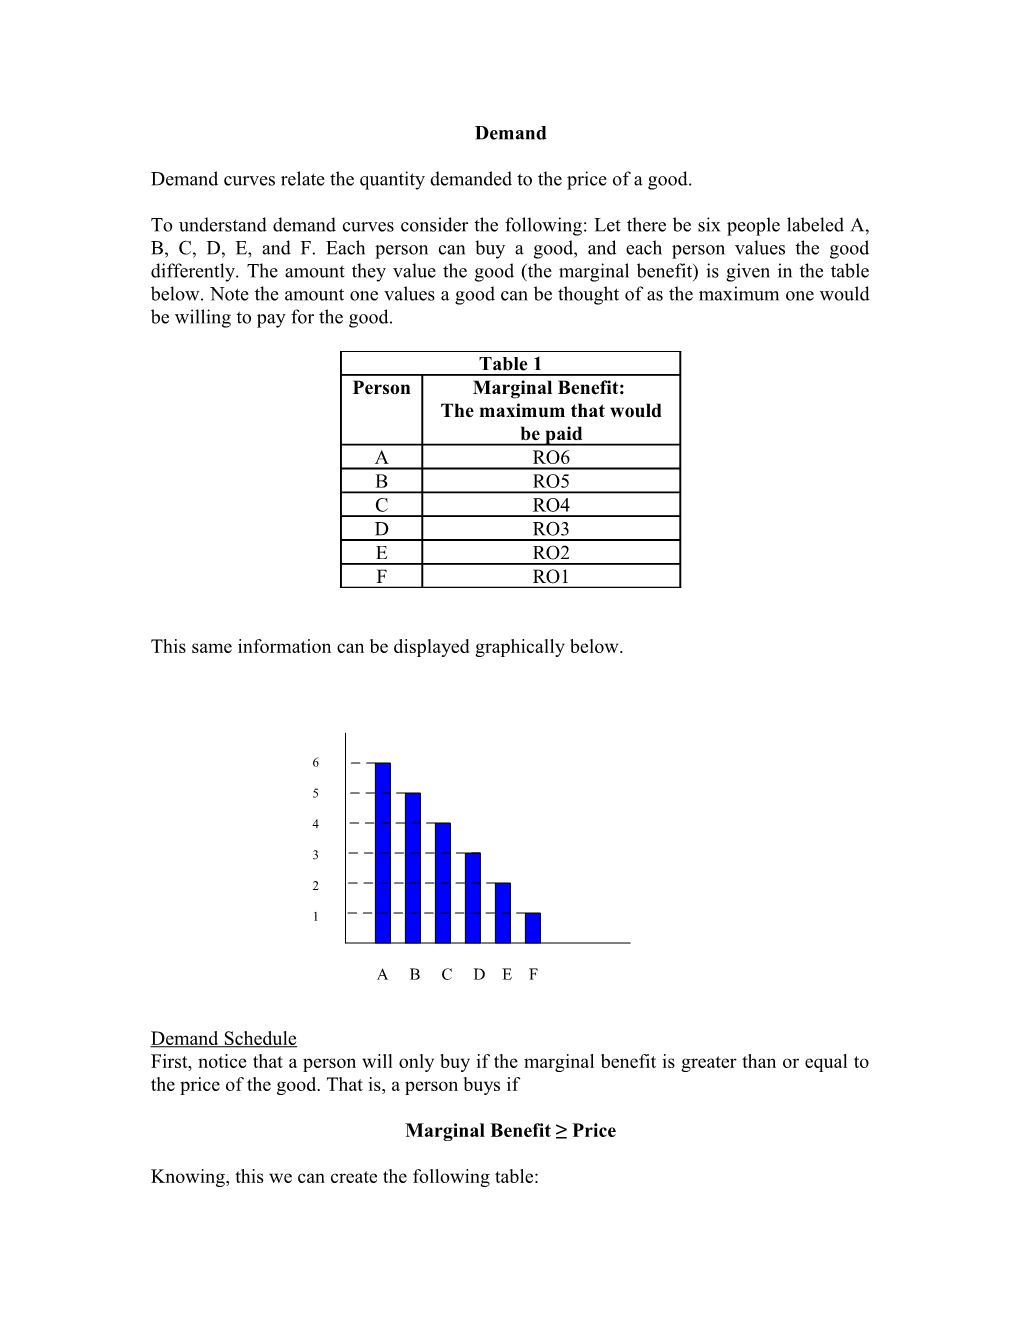 Demand Curves Relate the Quantity Demanded to the Price of a Good